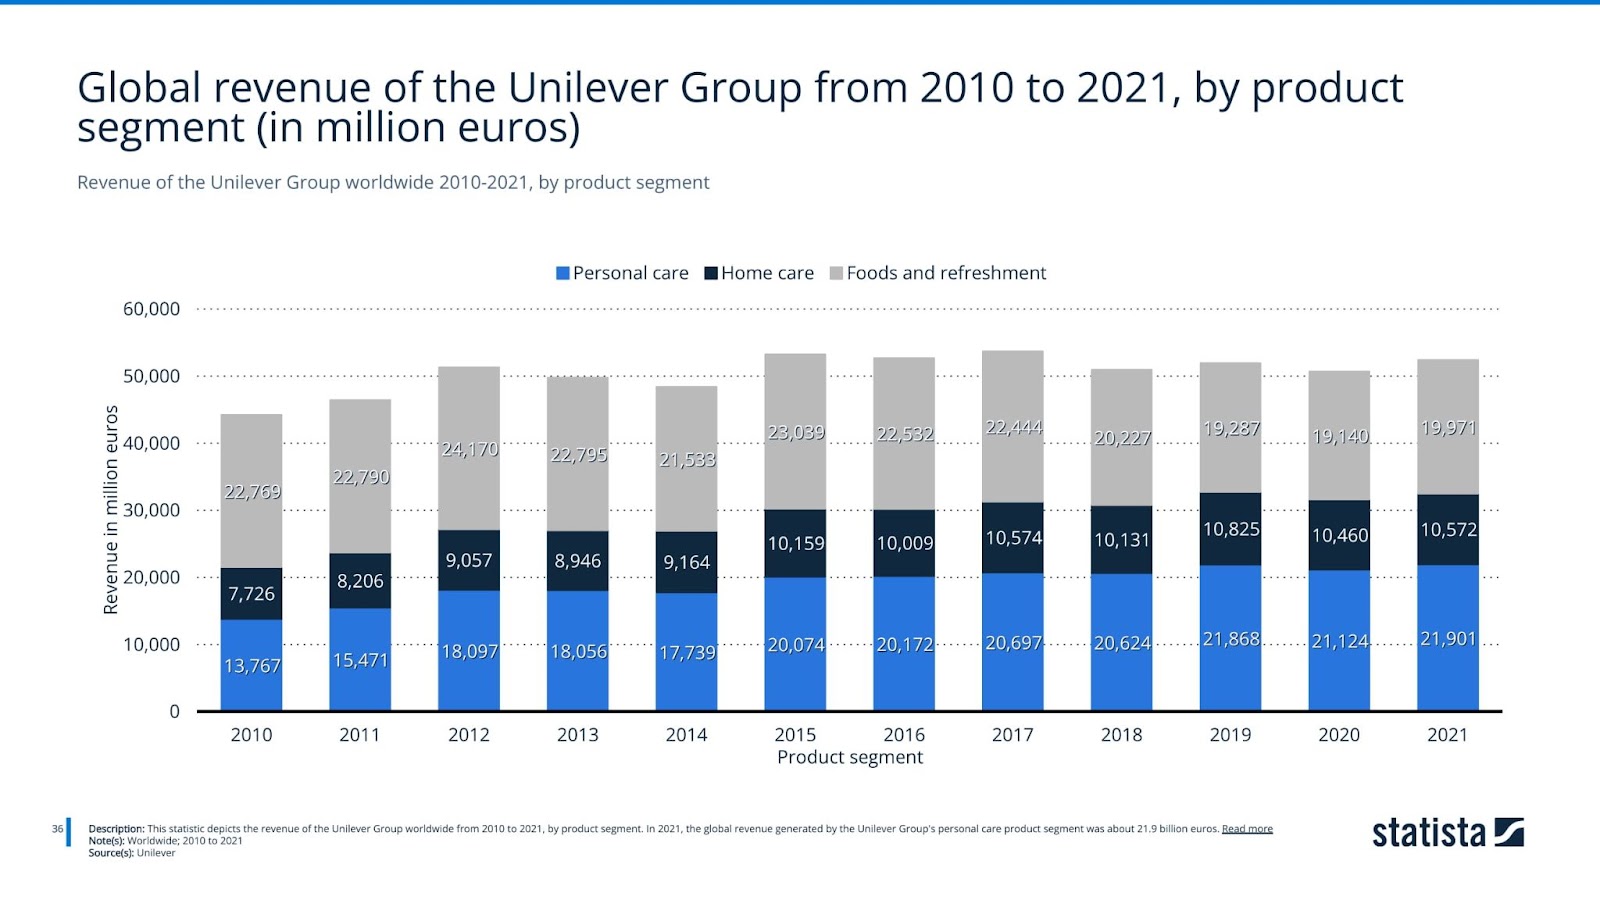 Revenue of the Unilever Group worldwide 2010-2021, by product segment